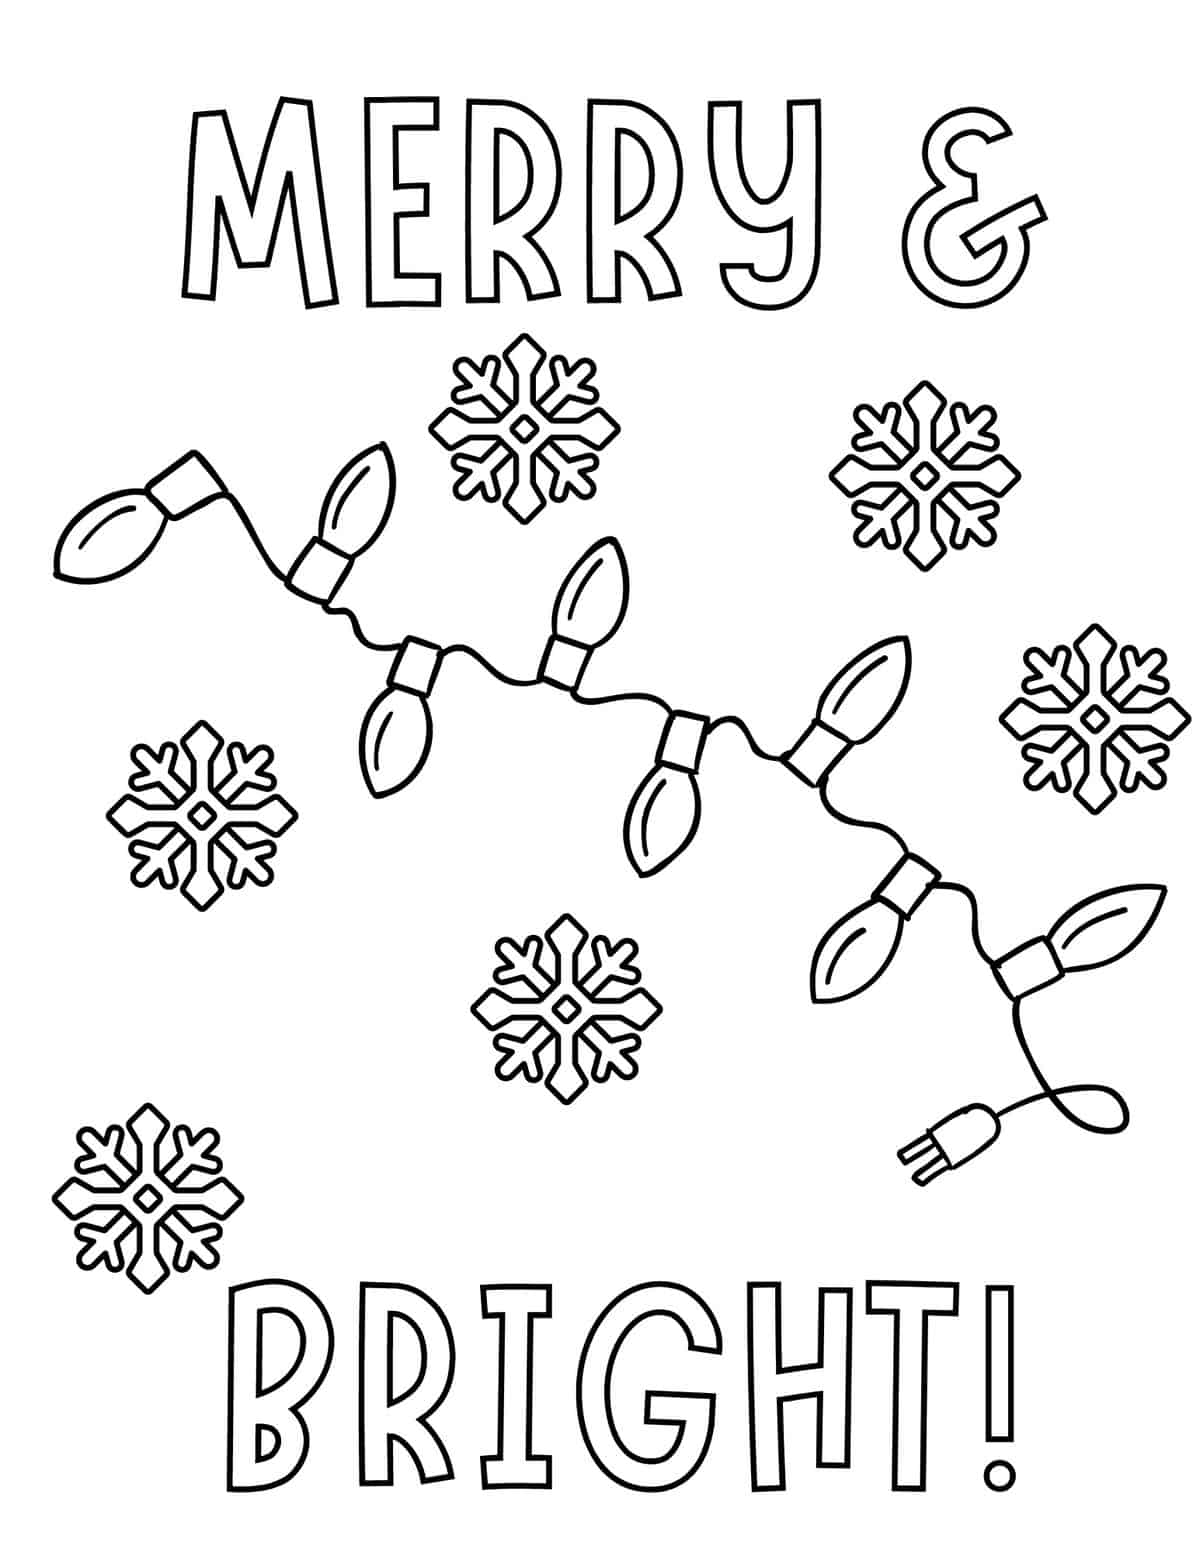 Merry & Bright Christmas lights coloring sheet